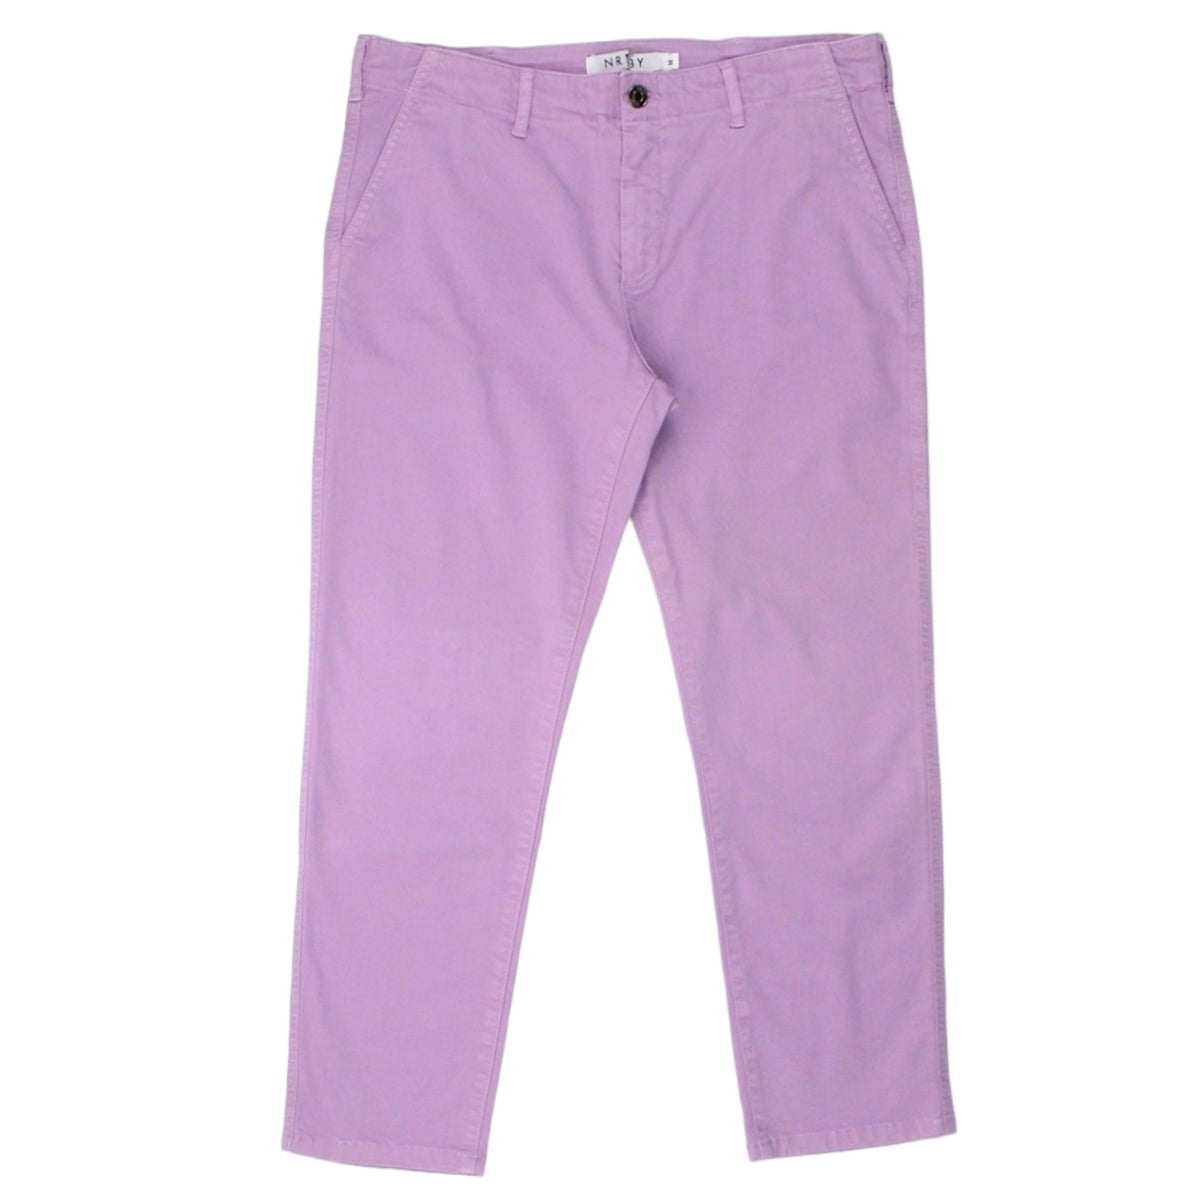 NRBY Lilac Canvas Chinos - Sample